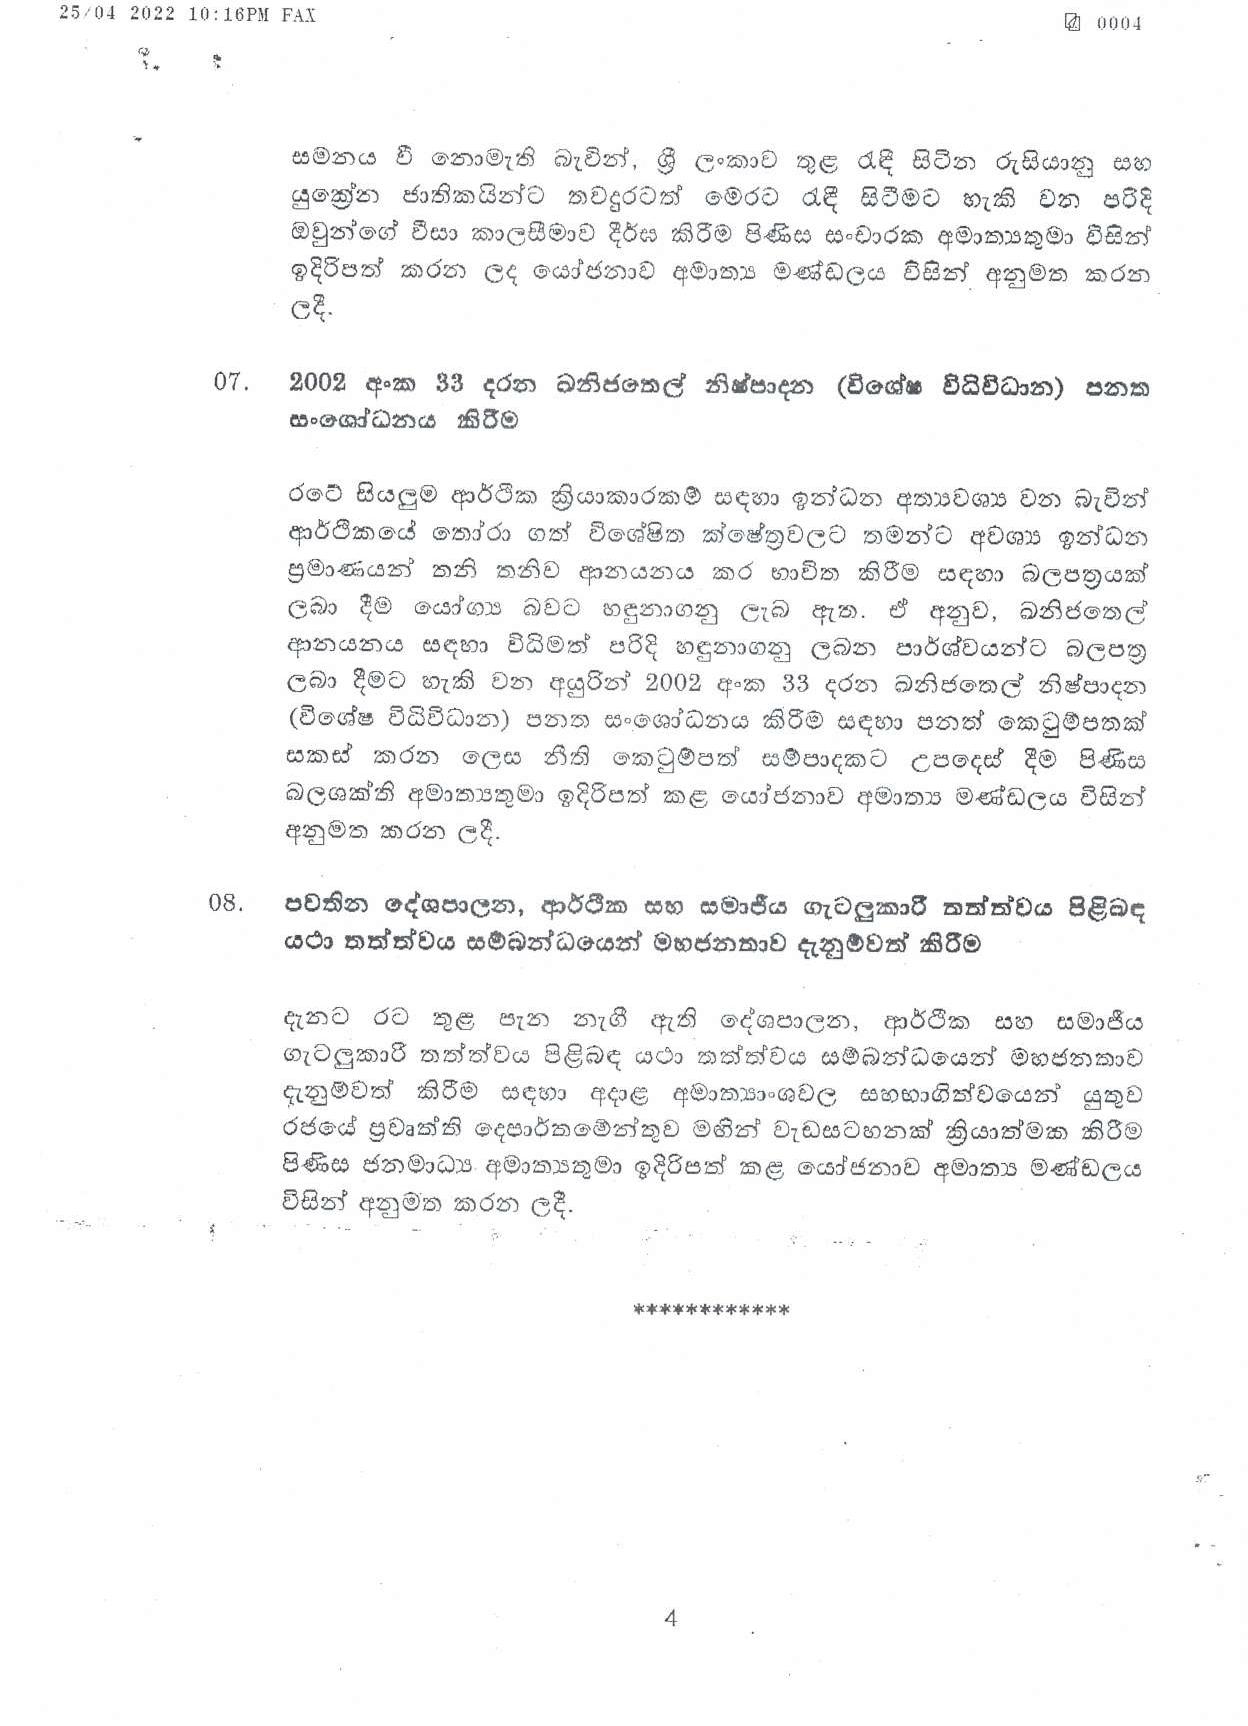 Cabinet Press Breifing on 25.04.2022 page 004